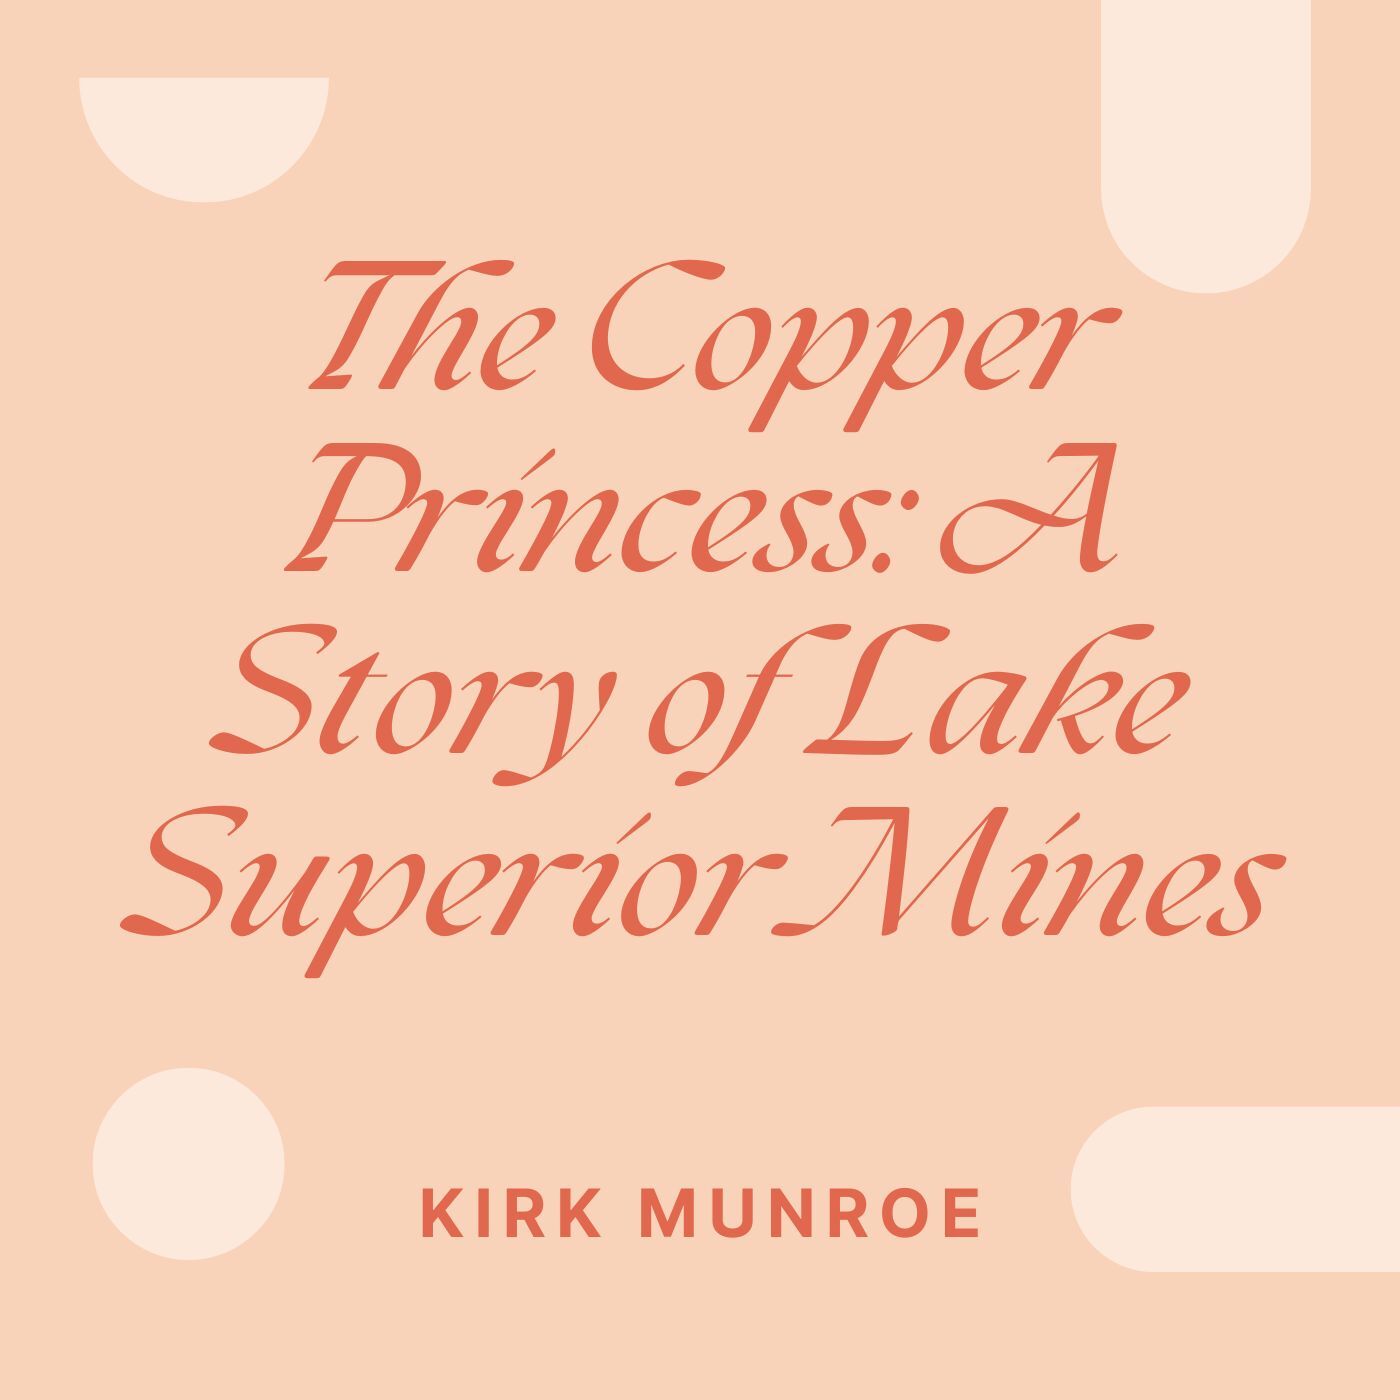 The Copper Princess: A Story of Lake Superior Mines by Kirk Munroe